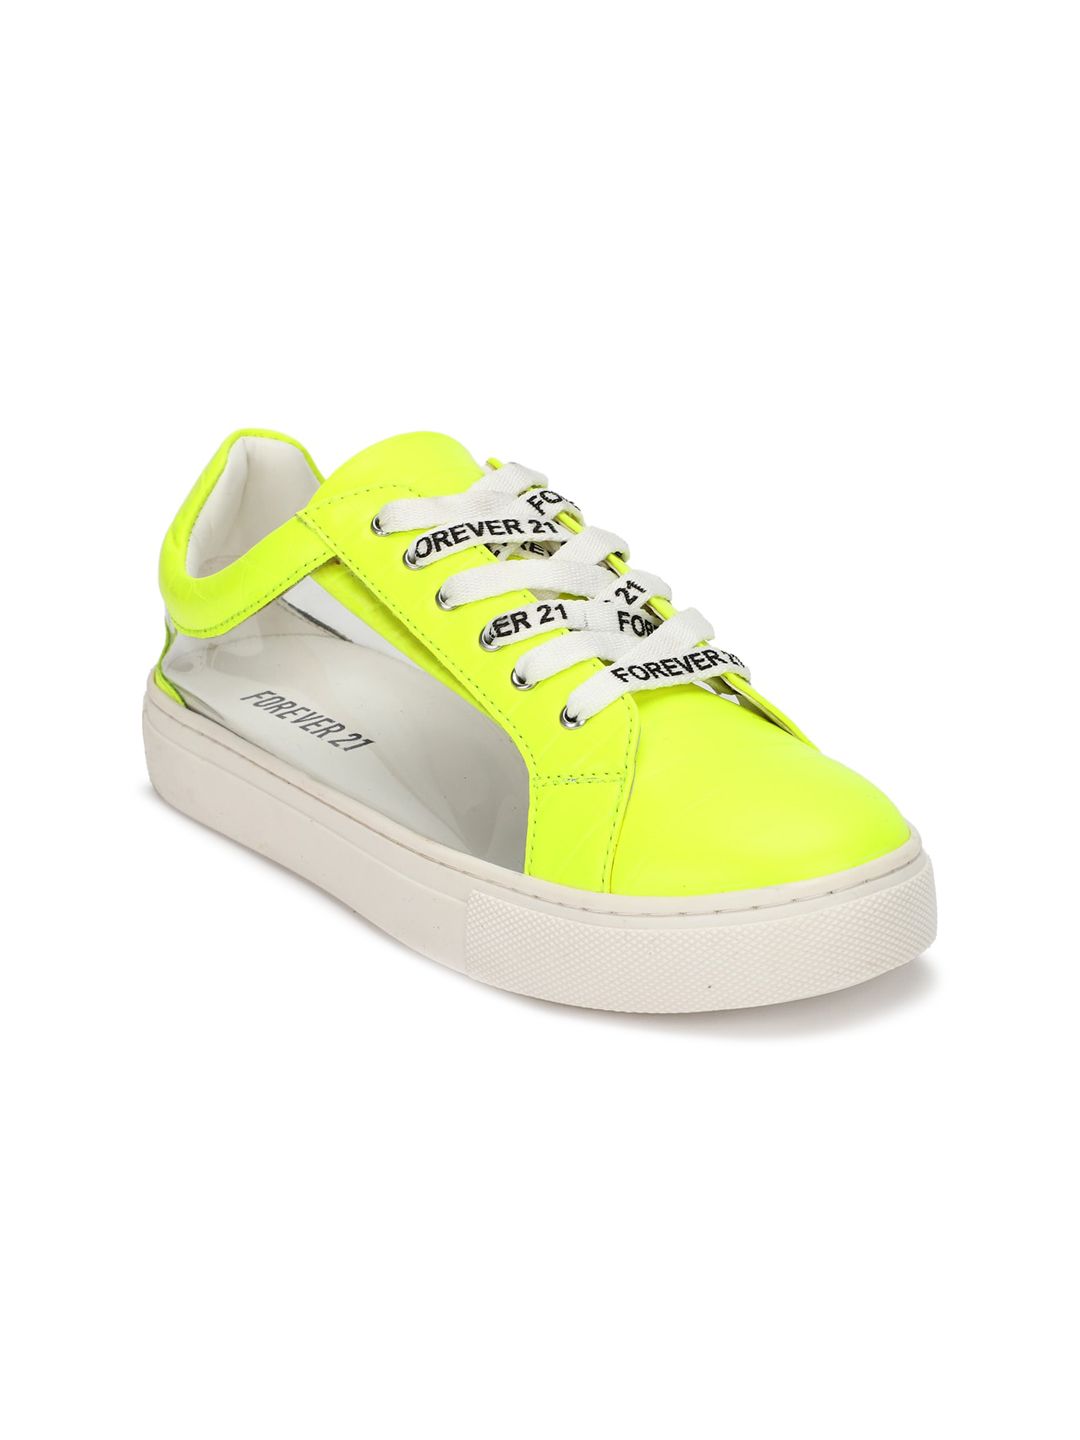 FOREVER 21 Women Green Printed PU Sneakers Price in India